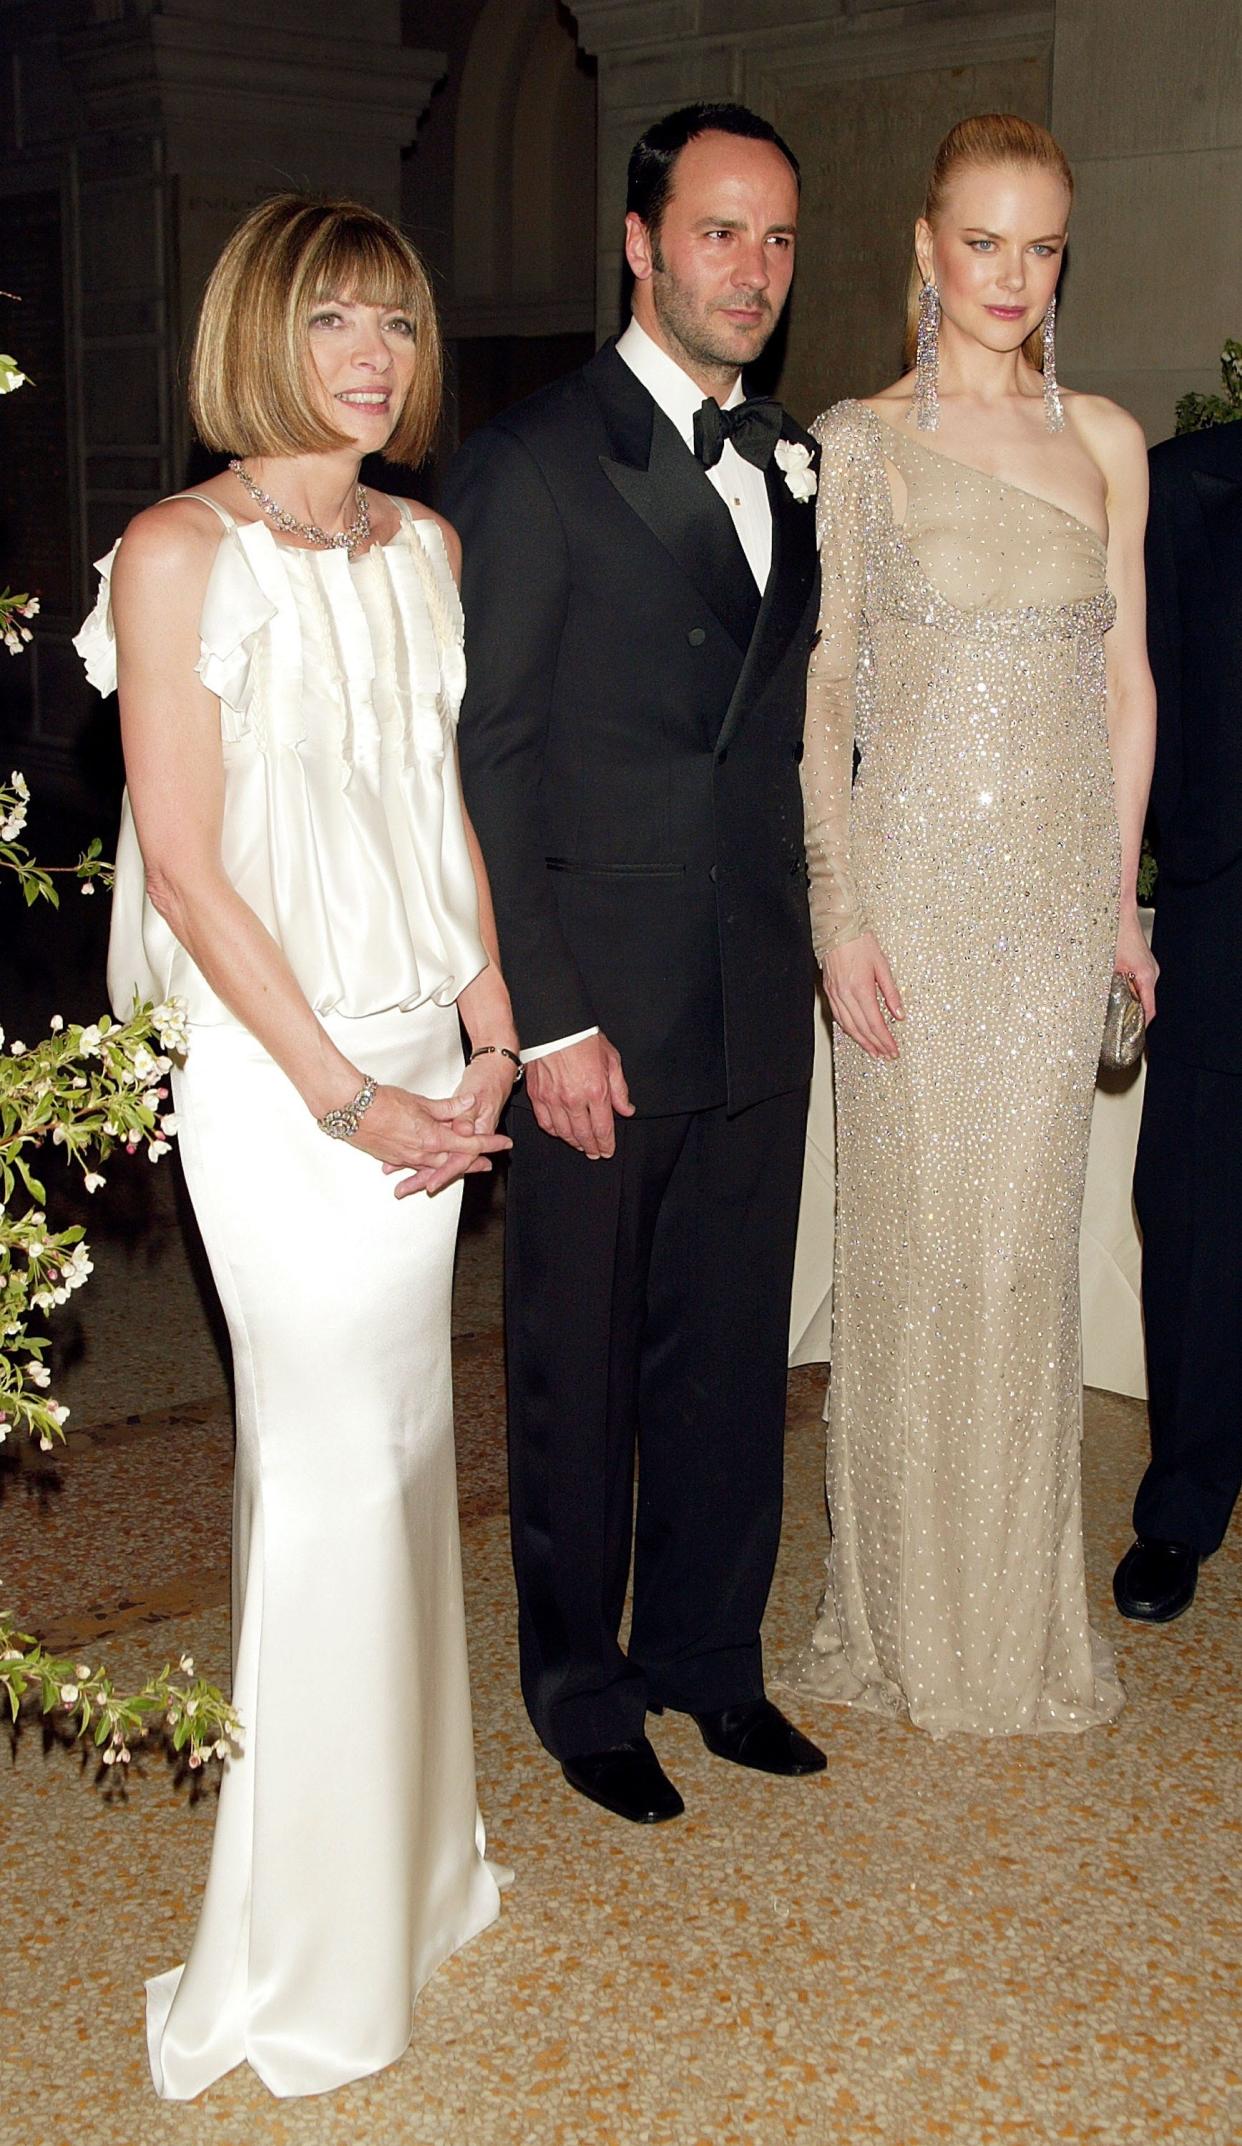 Anna Wintour, Tom Ford, and Nicole Kidman attend the 2003 Met Gala.